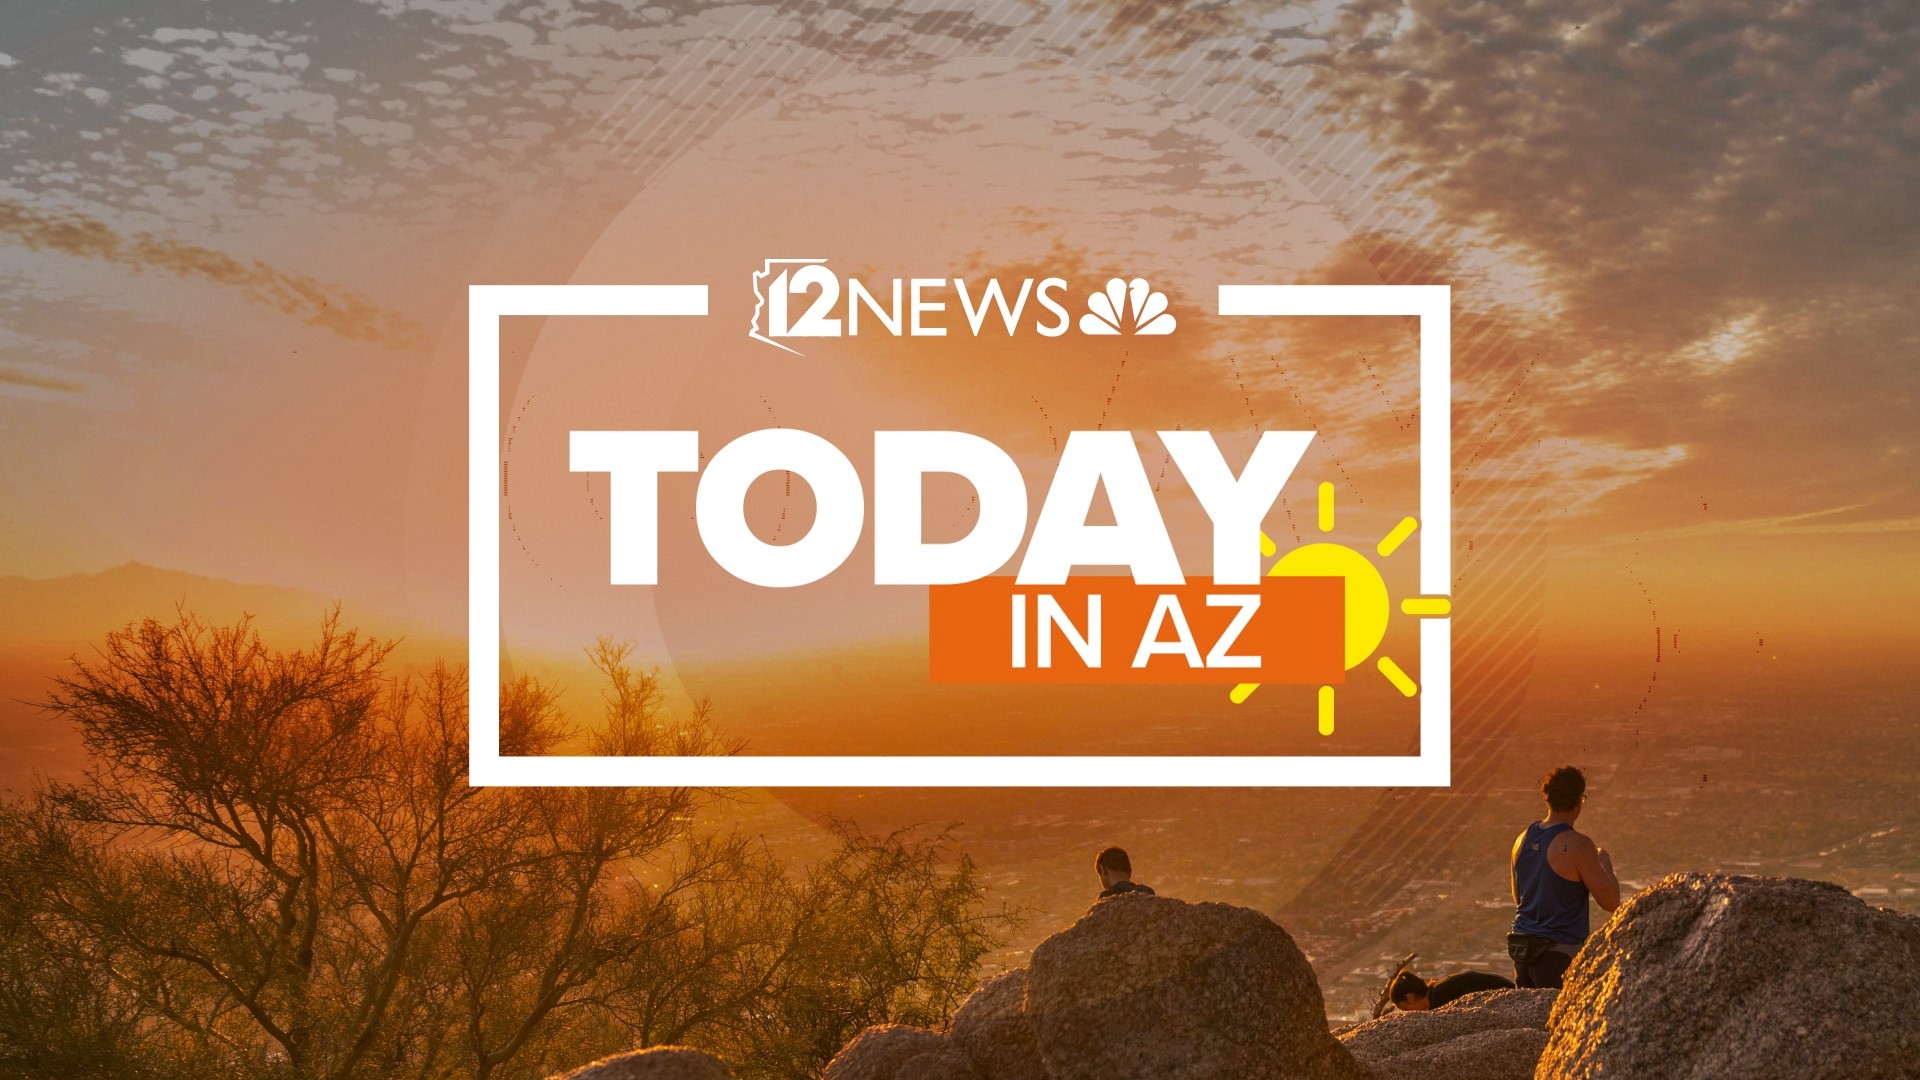 Details affecting local, regional, statewide and national news events of the day are provided by the 12News Team as well as updates on weather and traffic.